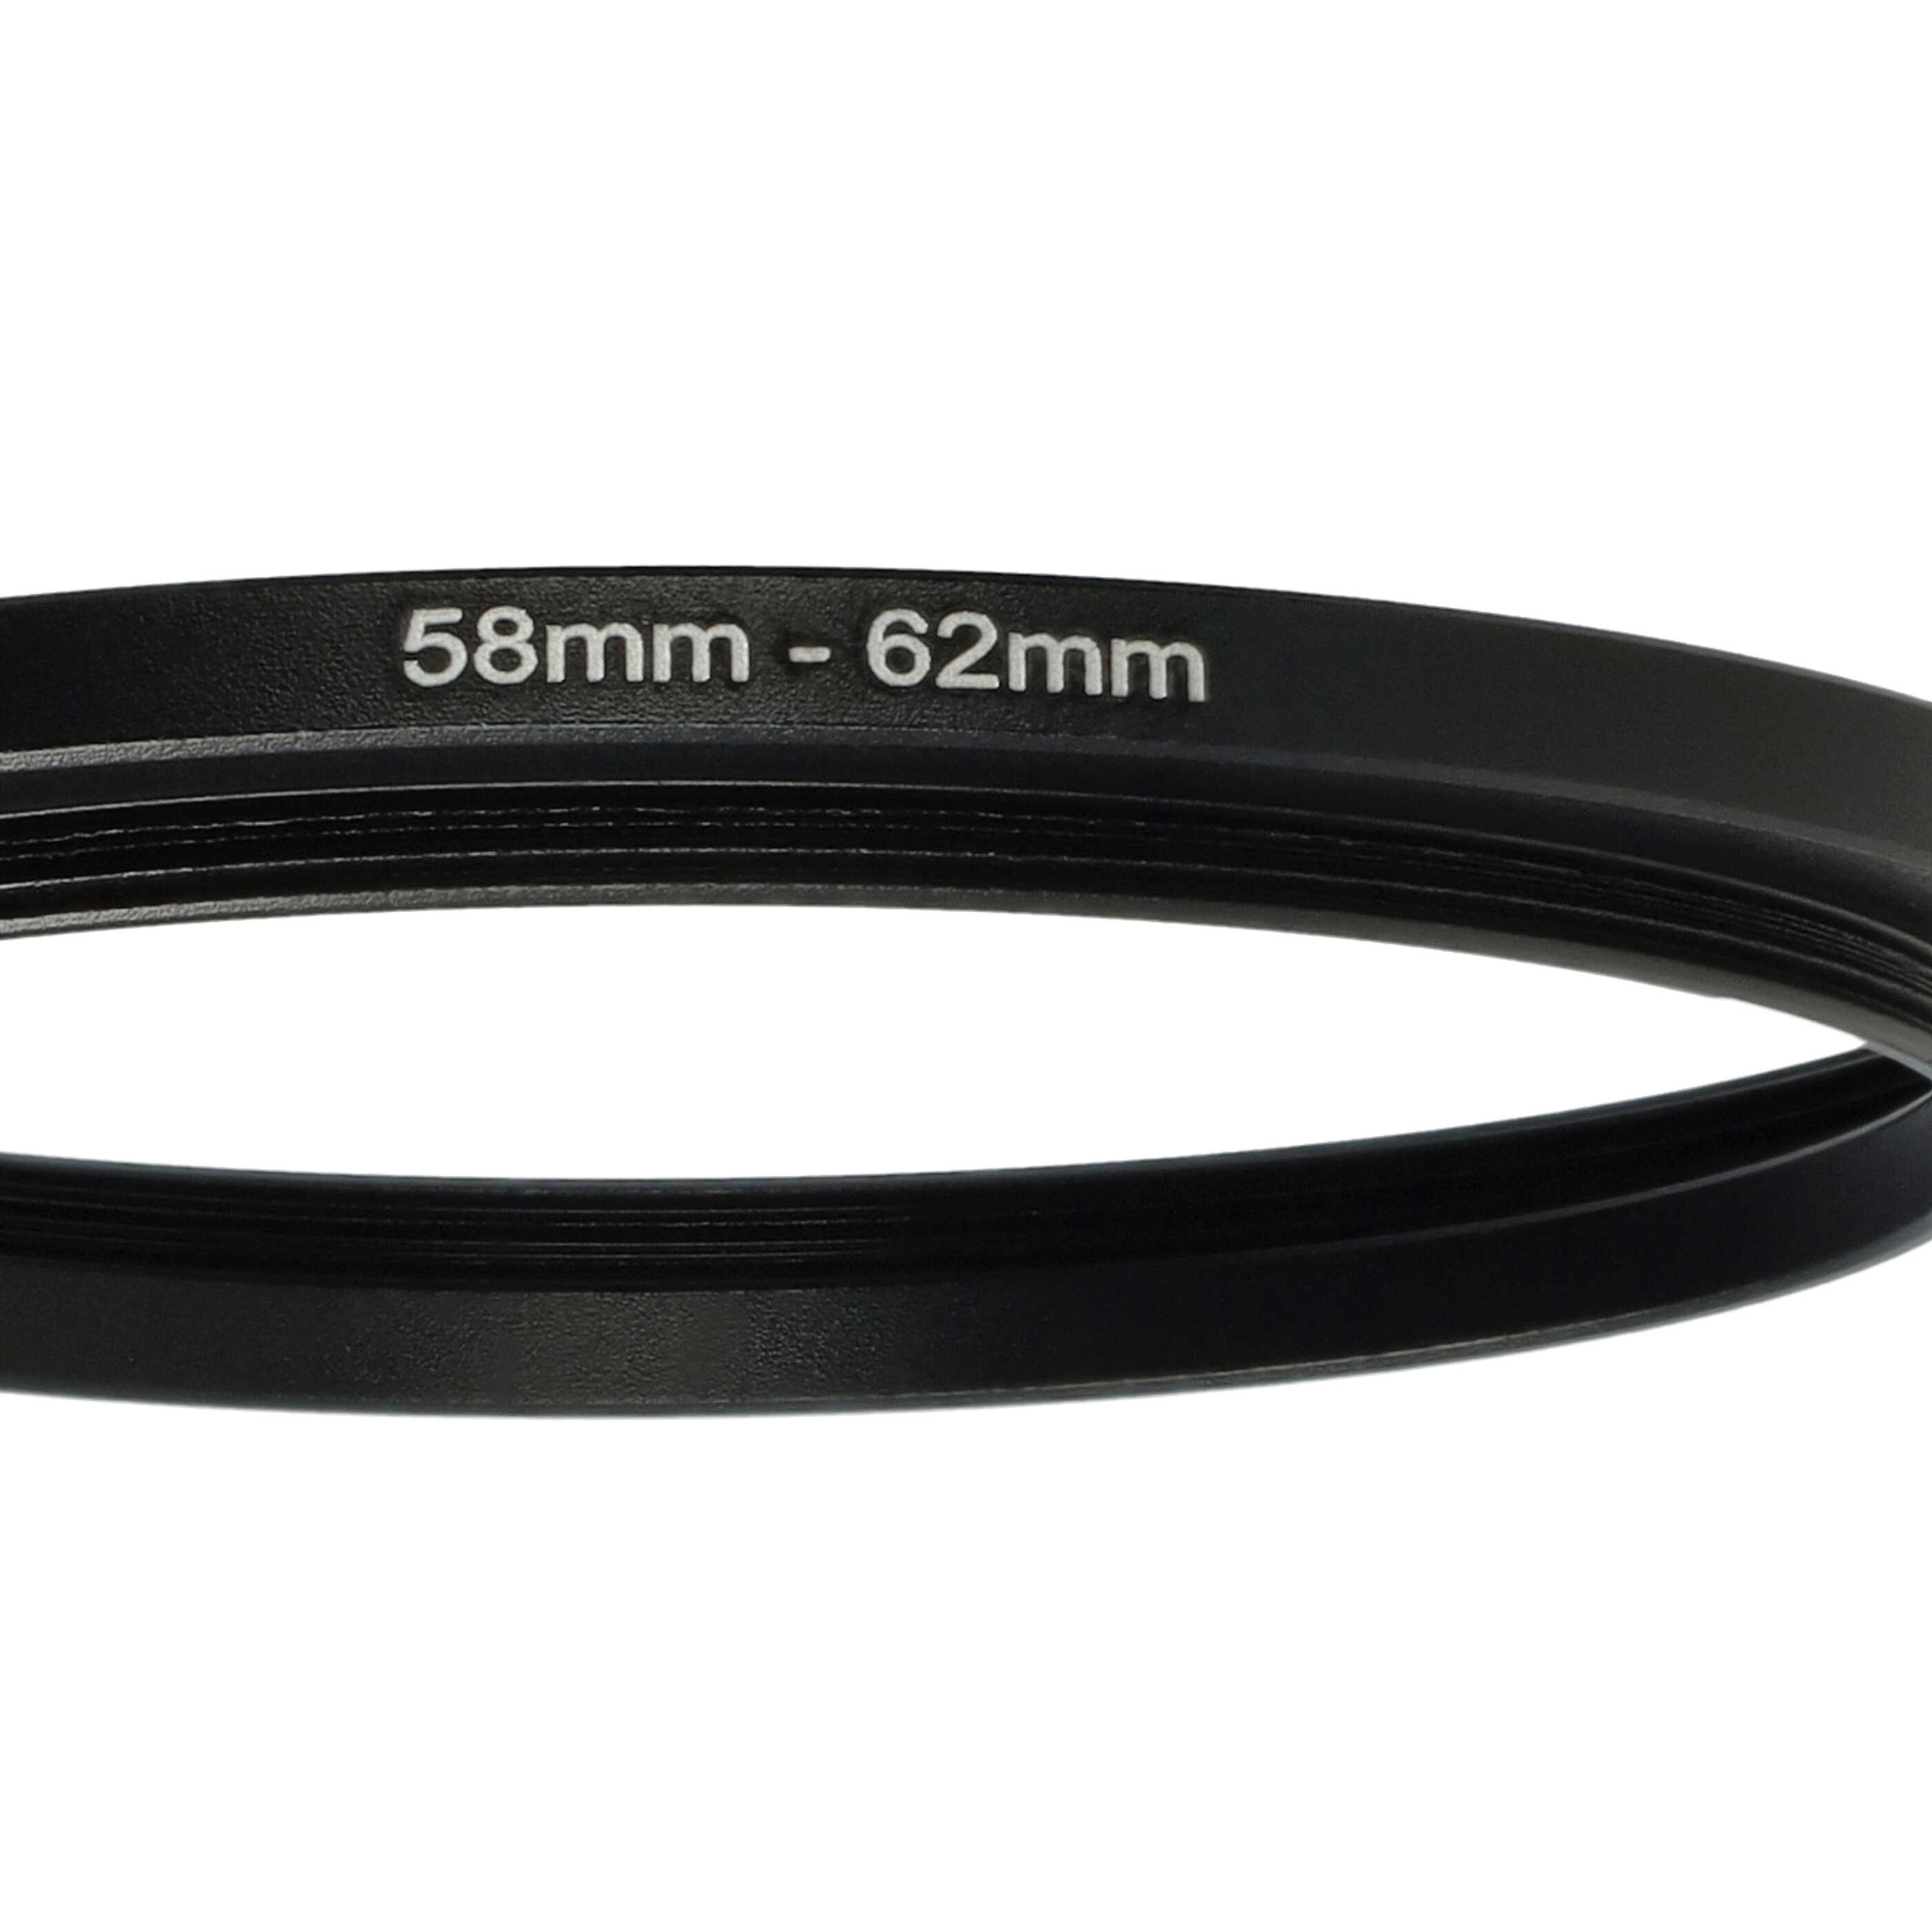 Step-Up Ring Adapter of 58 mm to 62 mmfor various Camera Lens - Filter Adapter